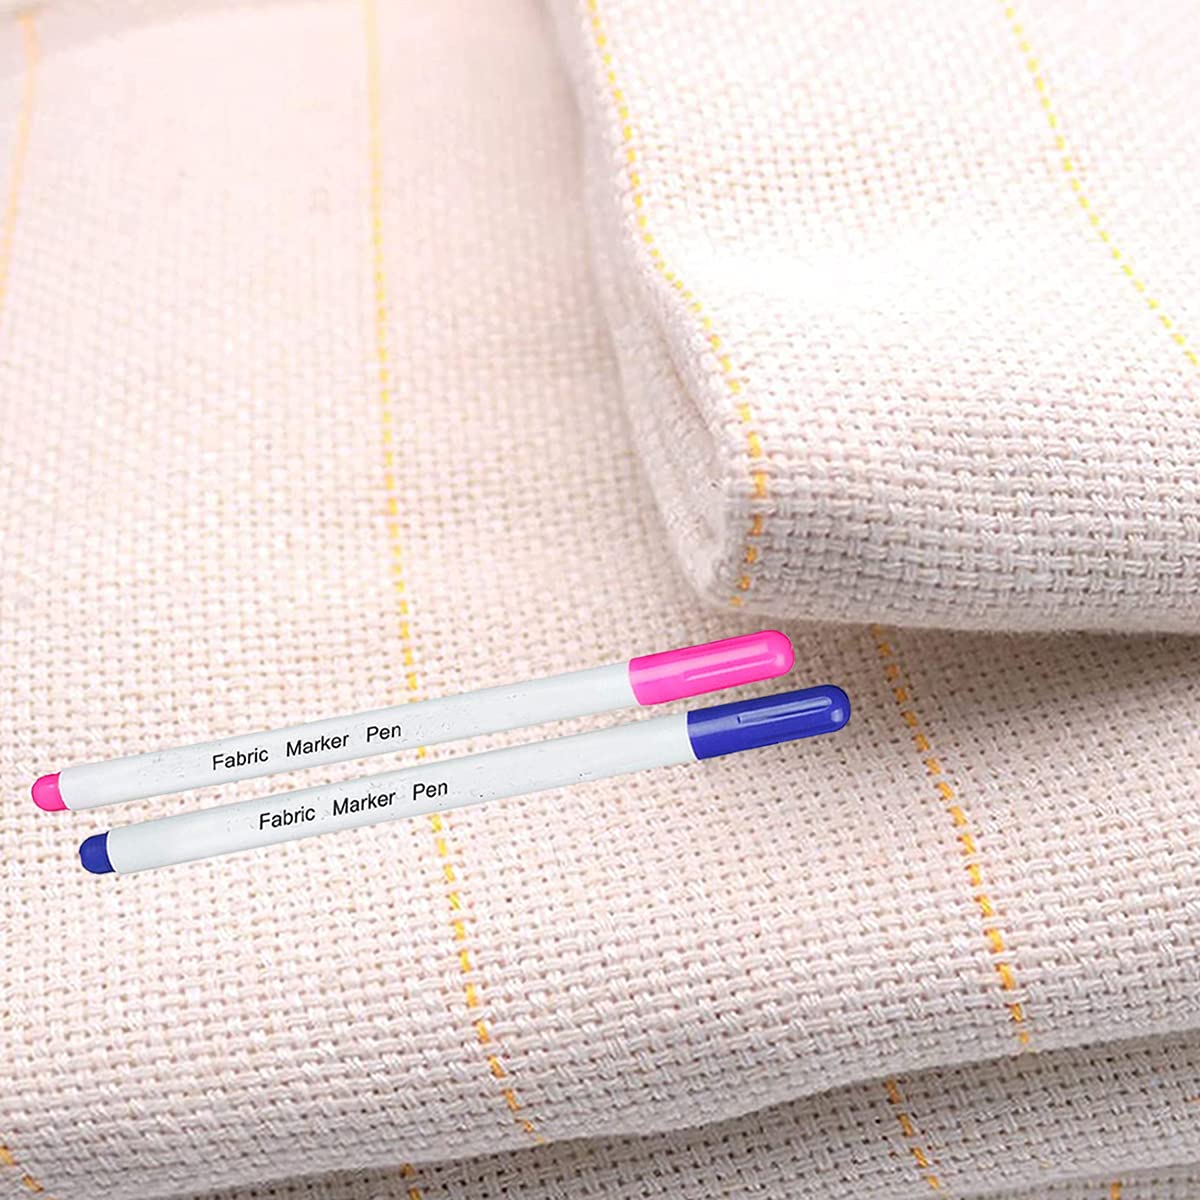 Y-Axis Monks Cloth with Marked Lines for Rugs Tufting Embroidery Punch  Needle Cloth with 2 Fabric Marker Pens (5 x 8 Ft.)